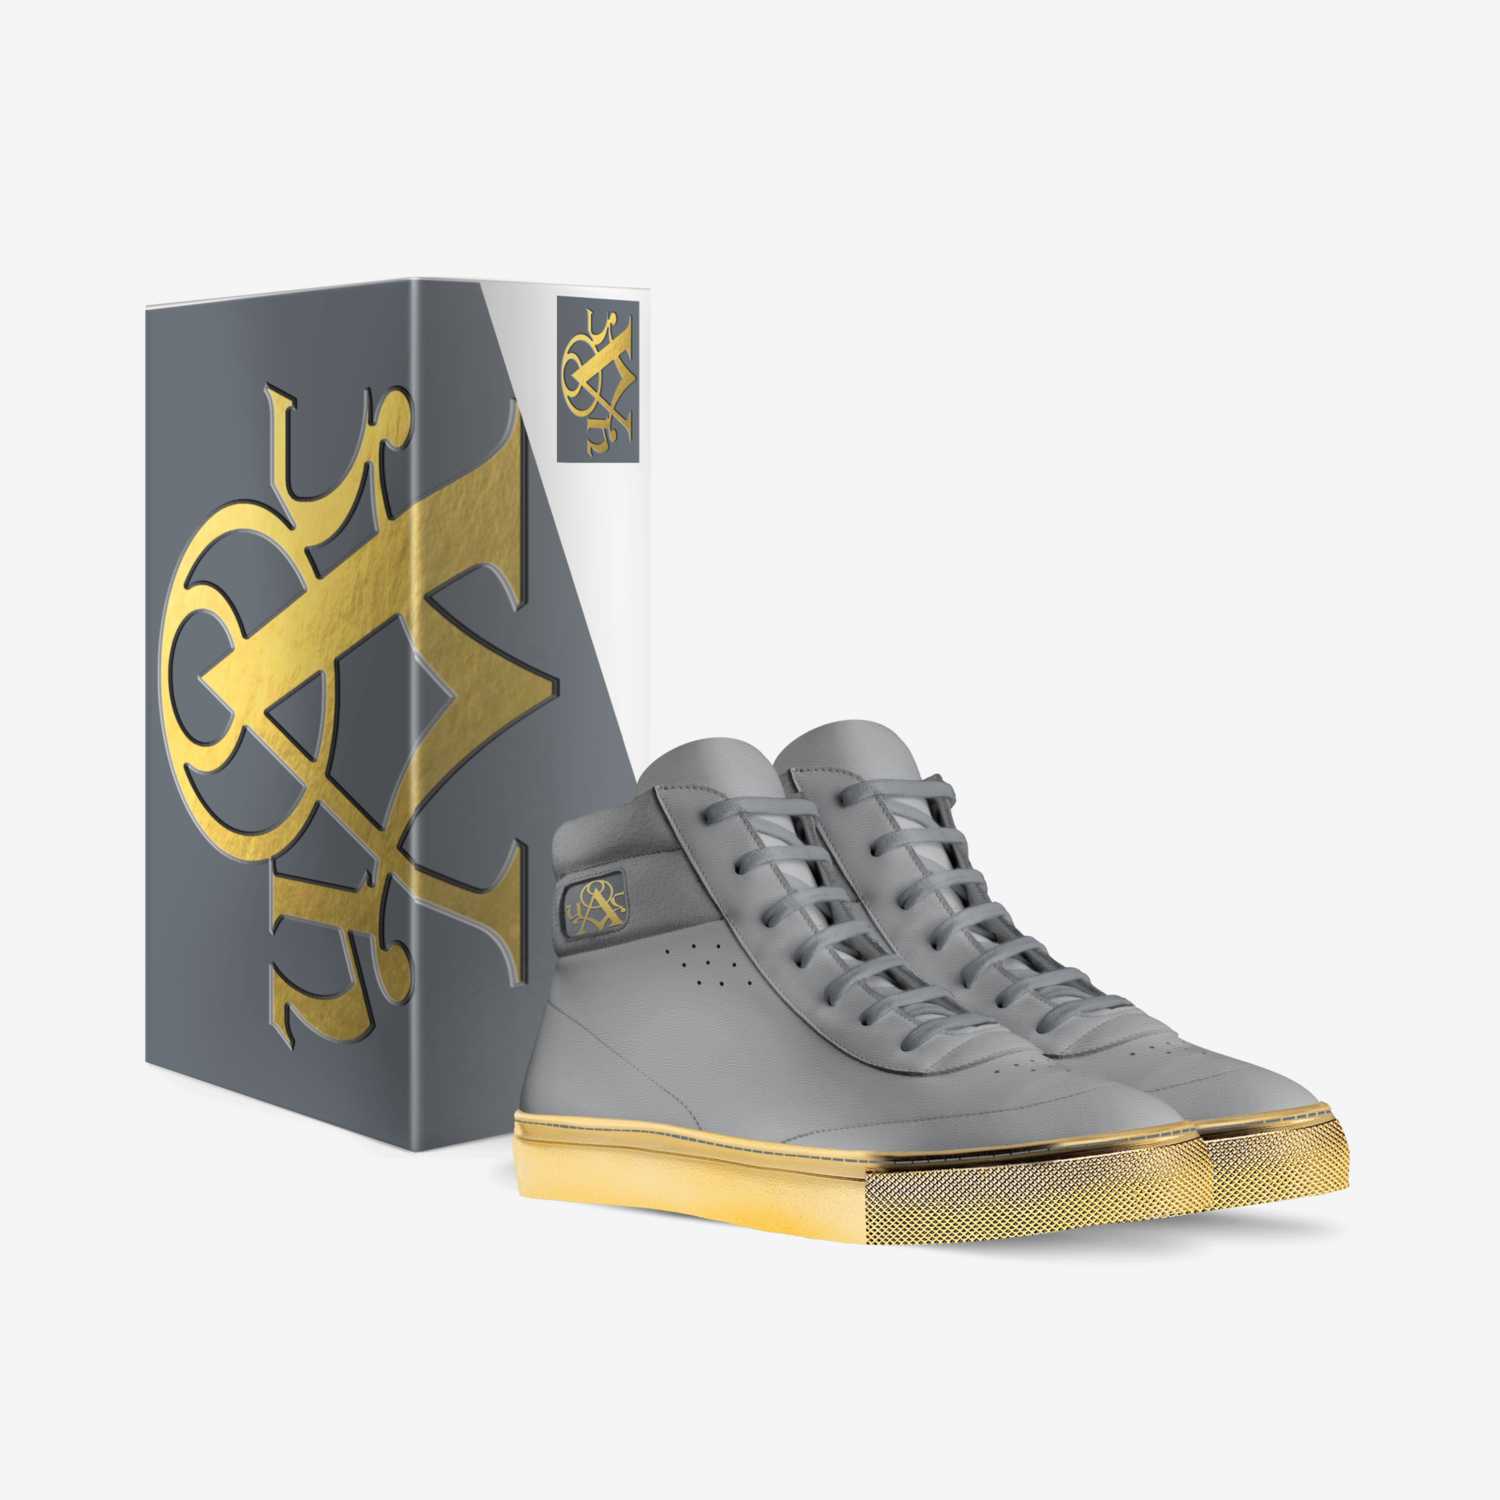 Santiago custom made in Italy shoes by Urban Alchemist Clothing | Box view